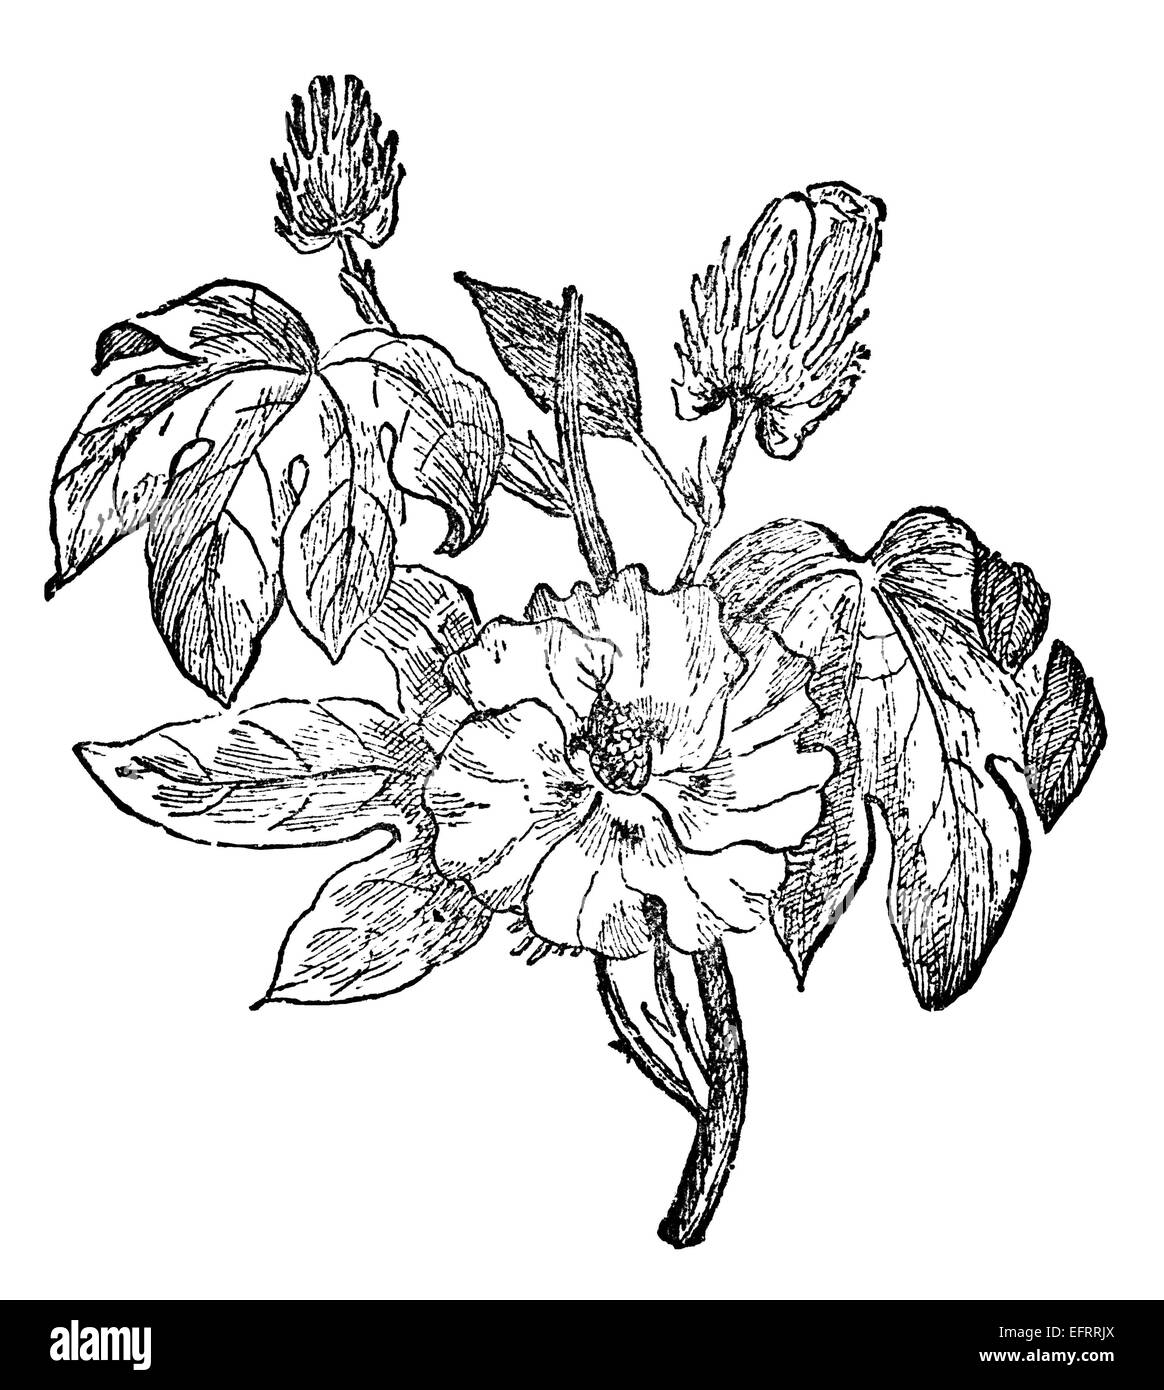 Victorian engraving of a cotton plant. Digitally restored image from a mid-19th century Encyclopaedia. Stock Photo